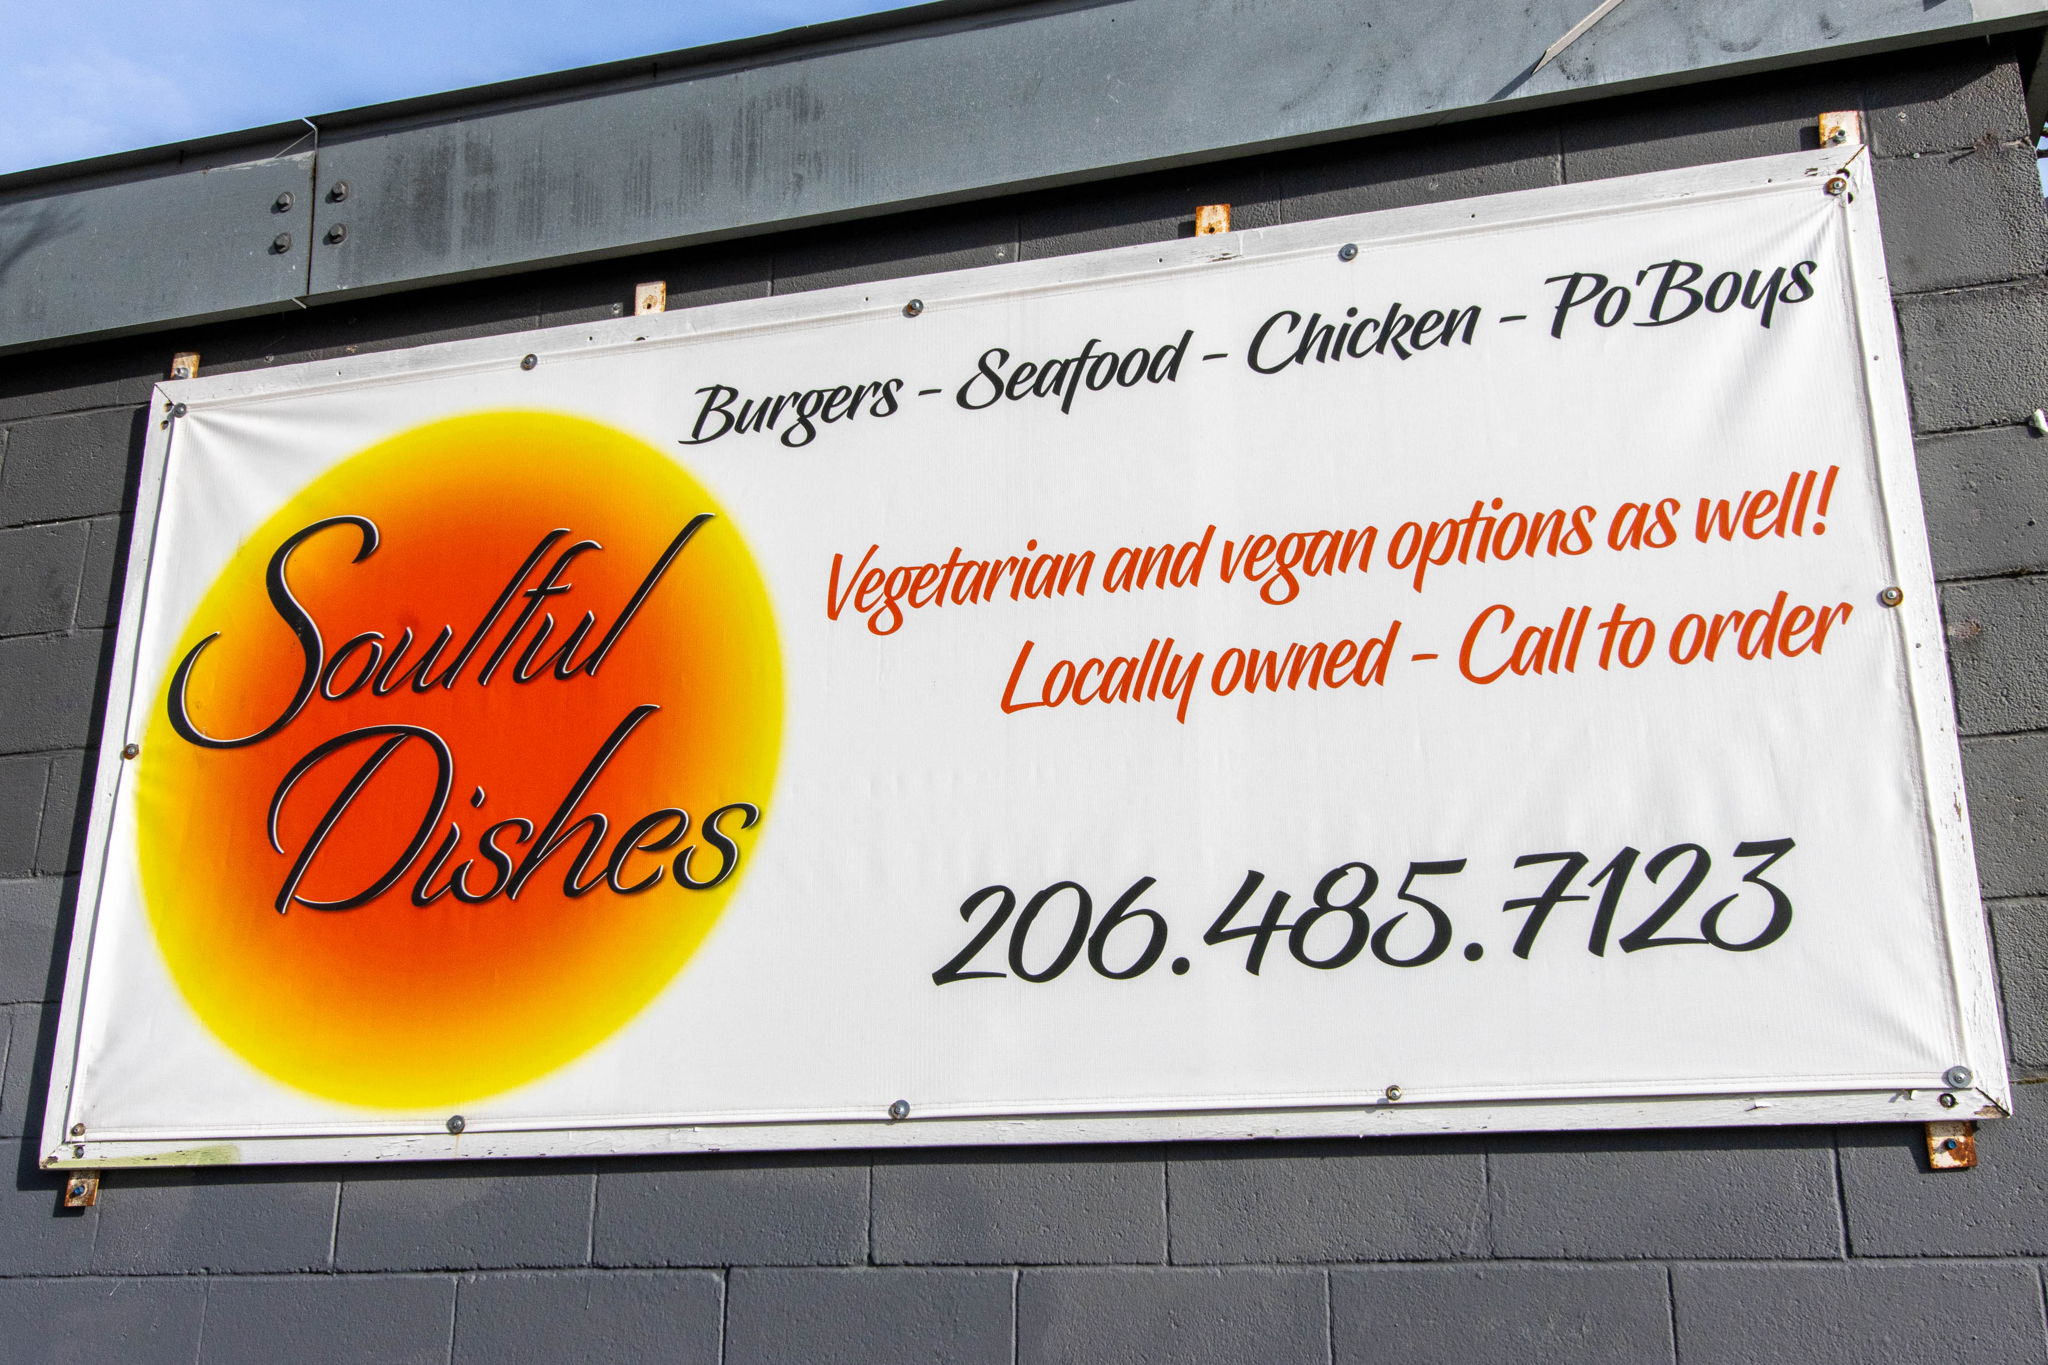 SOULFUL DISHES - RESTARAUNT AND TAKEOUT (Vegetarian and vegan options available.)